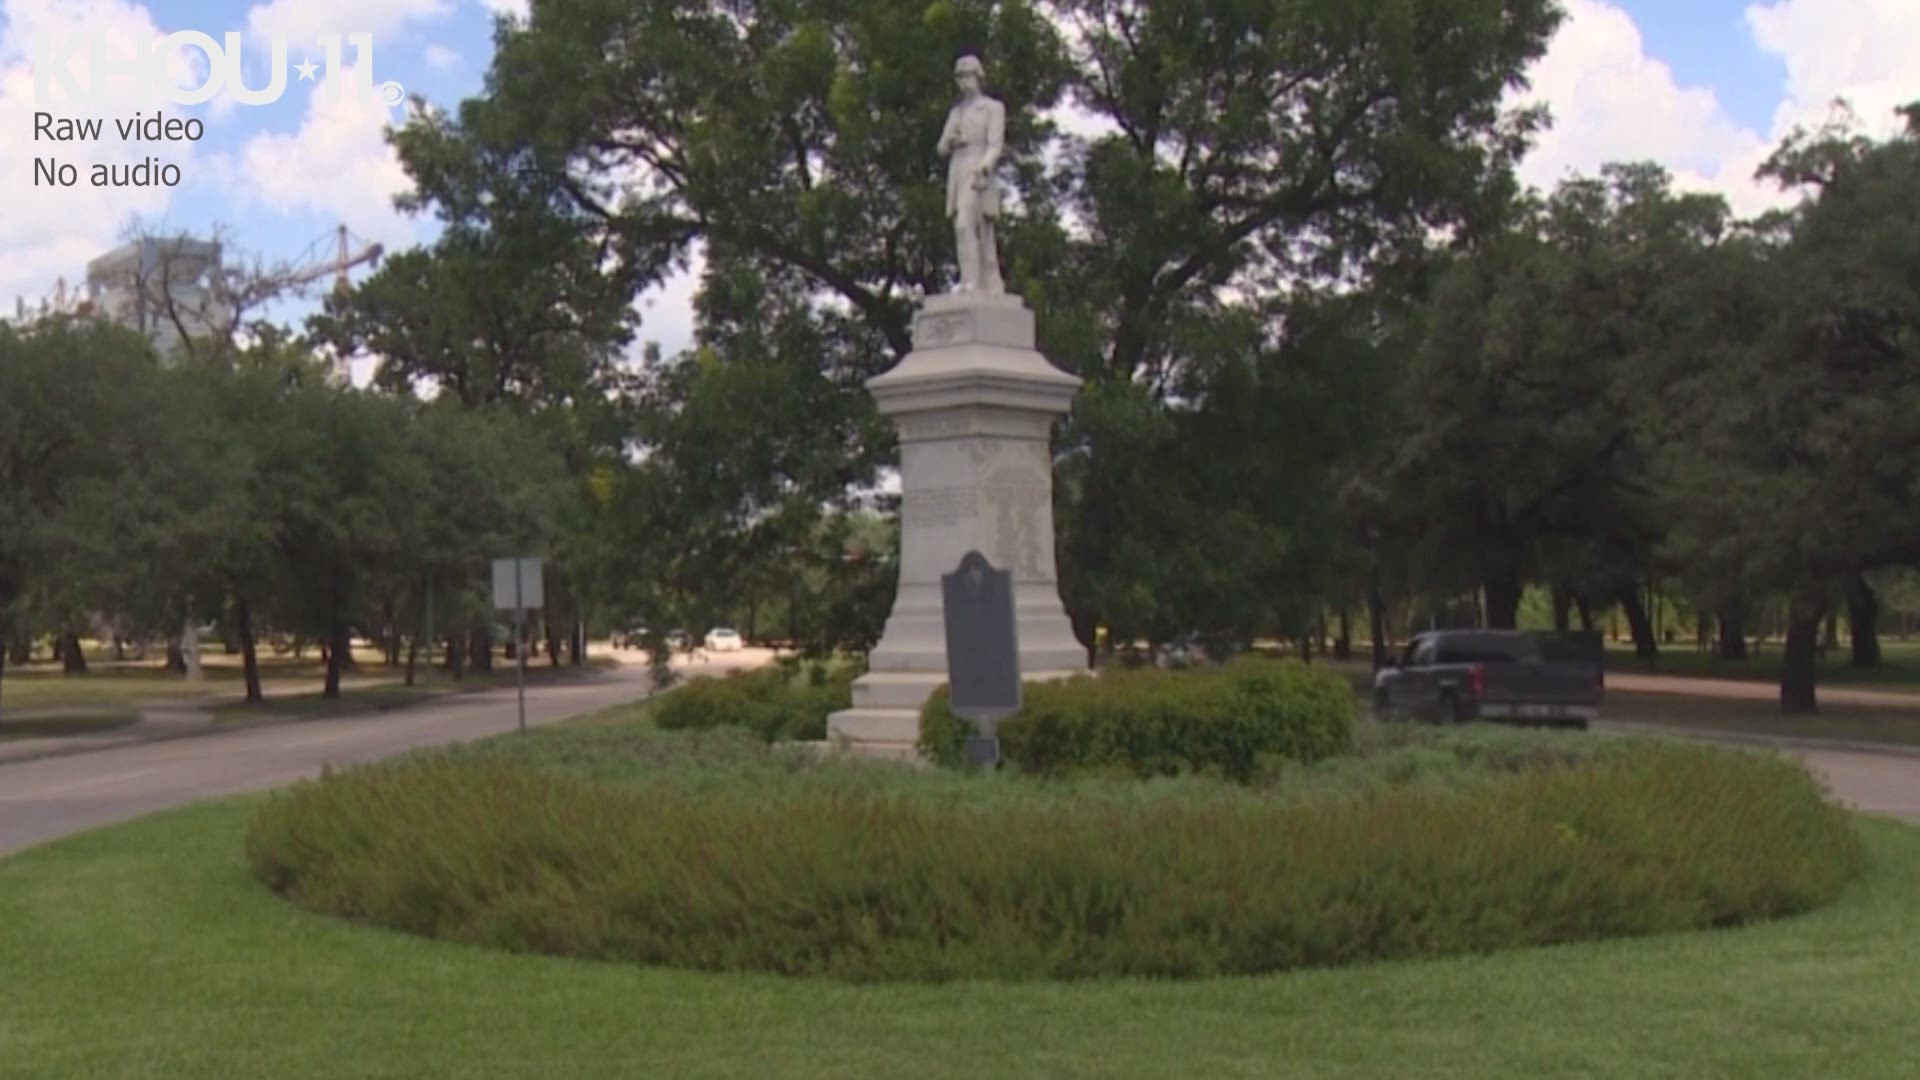 Mayor Sylvester Turner said the statues will be removed to prevent vandalism and provide better context.